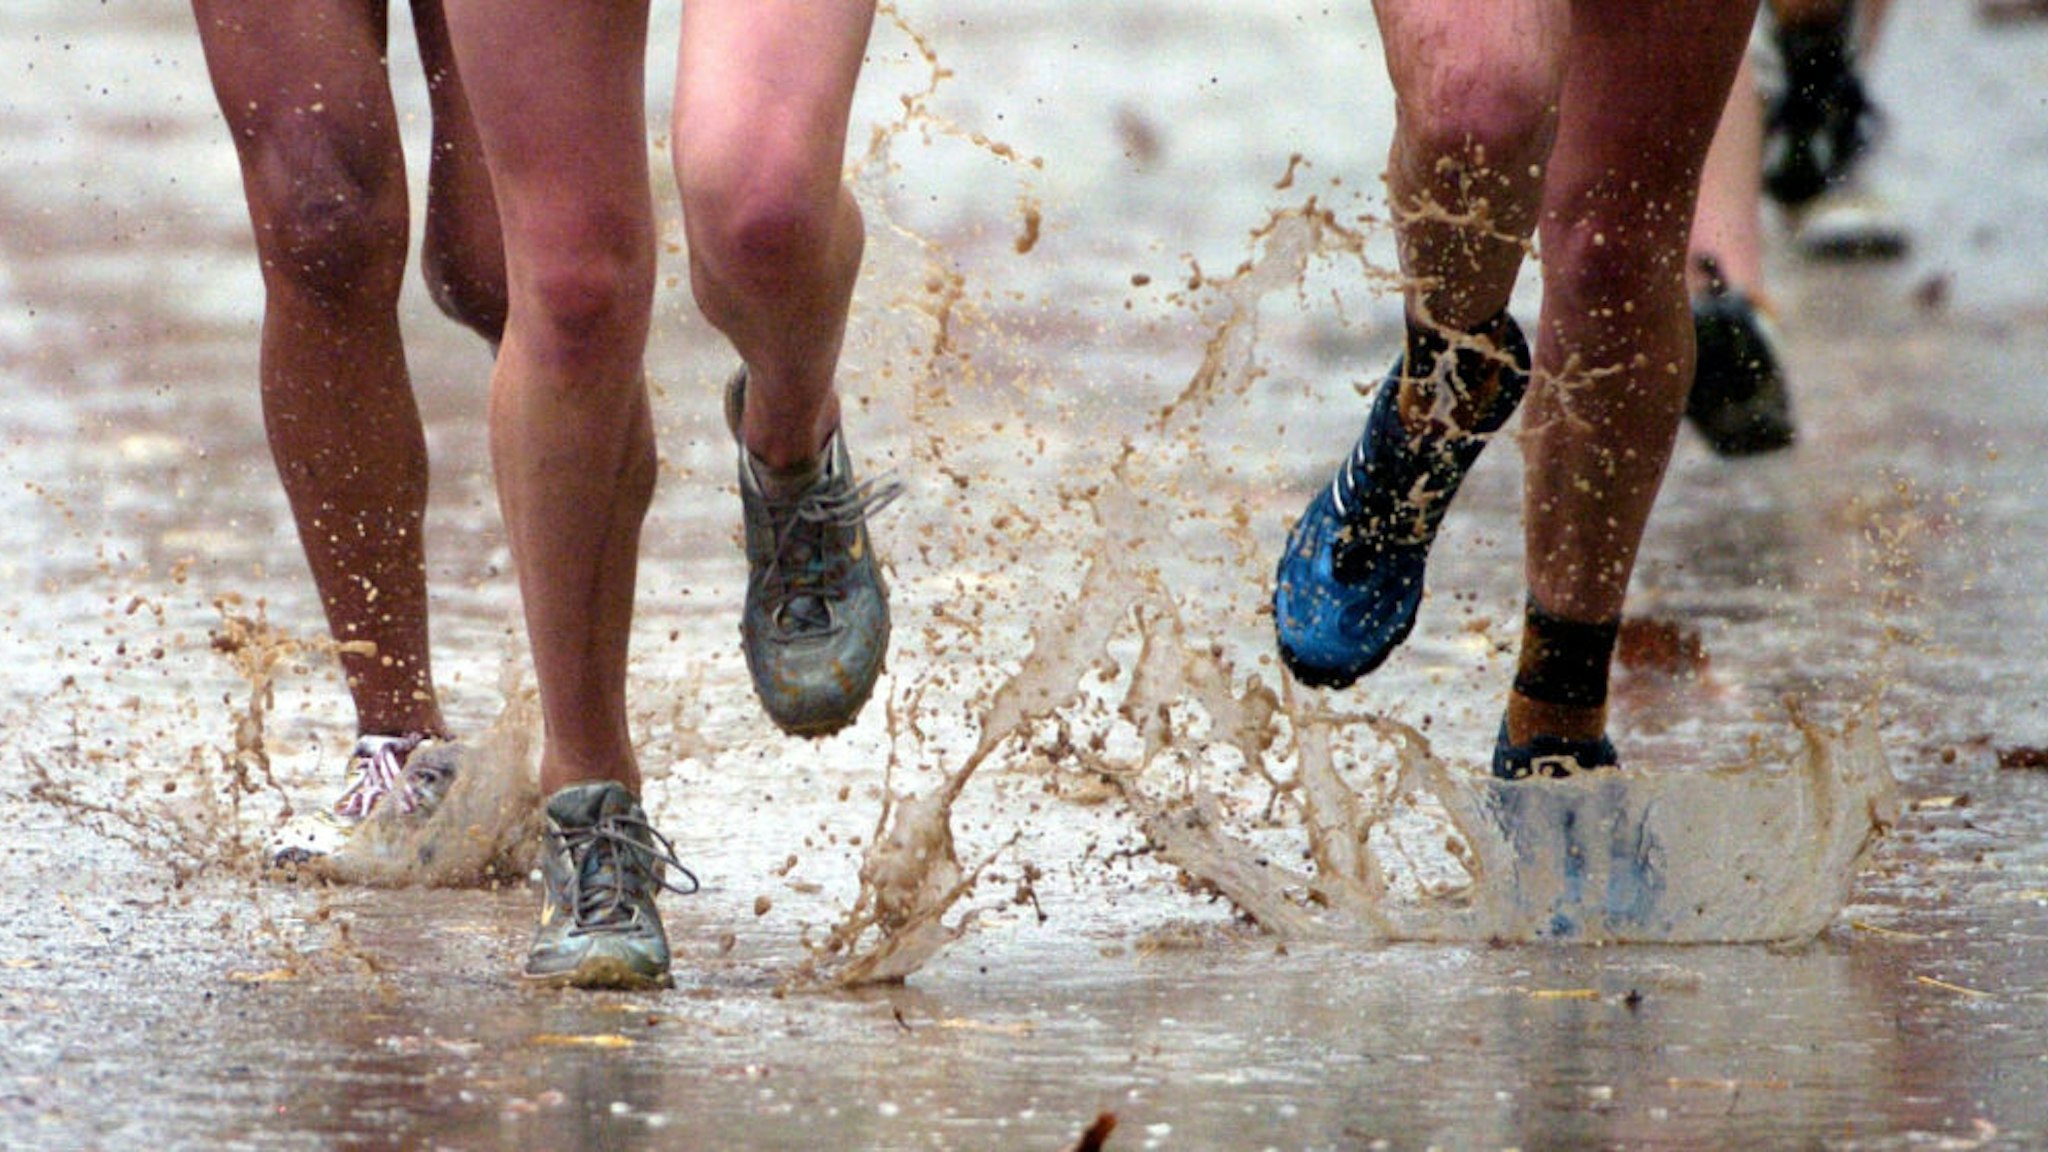 Competitors in the girls Division V race in the CIF-State Cross Country championships run through puddles of water at Woodward Park in Fresno, Calif. on Saturday, Nov. 27, 2004. (Photo by Kirby Lee/WireImage)